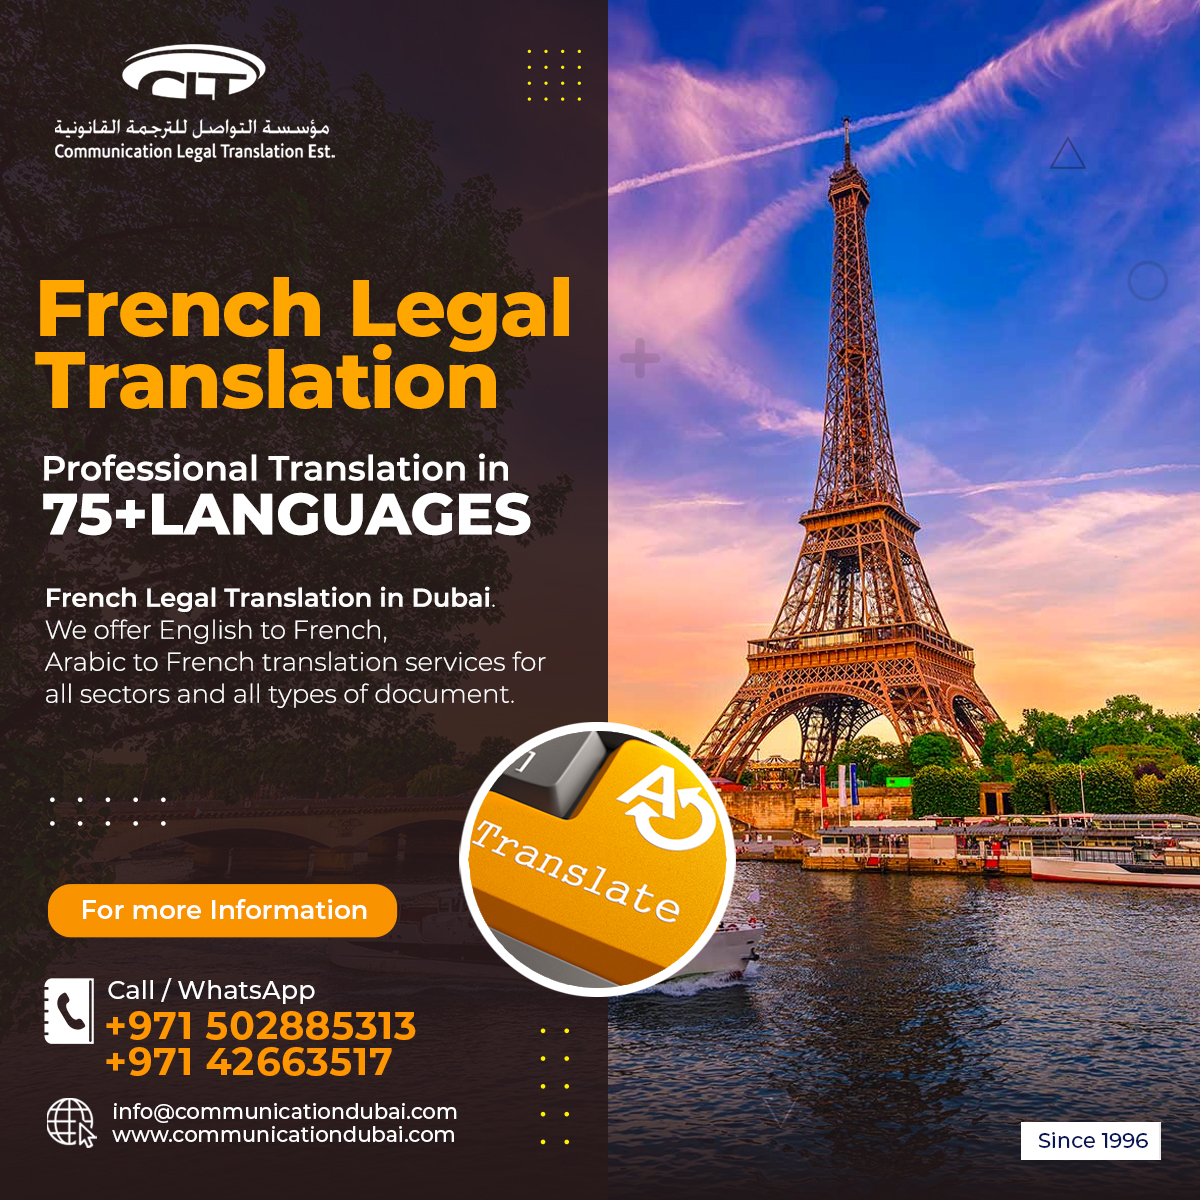 communicationdubai.com/english-to-fre…
Call / WhatsApp: +971 502885313

#frenchlanguage #ais #french #learnfrench #fran #france #speakfrench #frenchwords #frenchvocabulary #apprendrelefran #aise #ilovefrench #learningfrench #fle #languagelearning #frenchclass #studyfrench